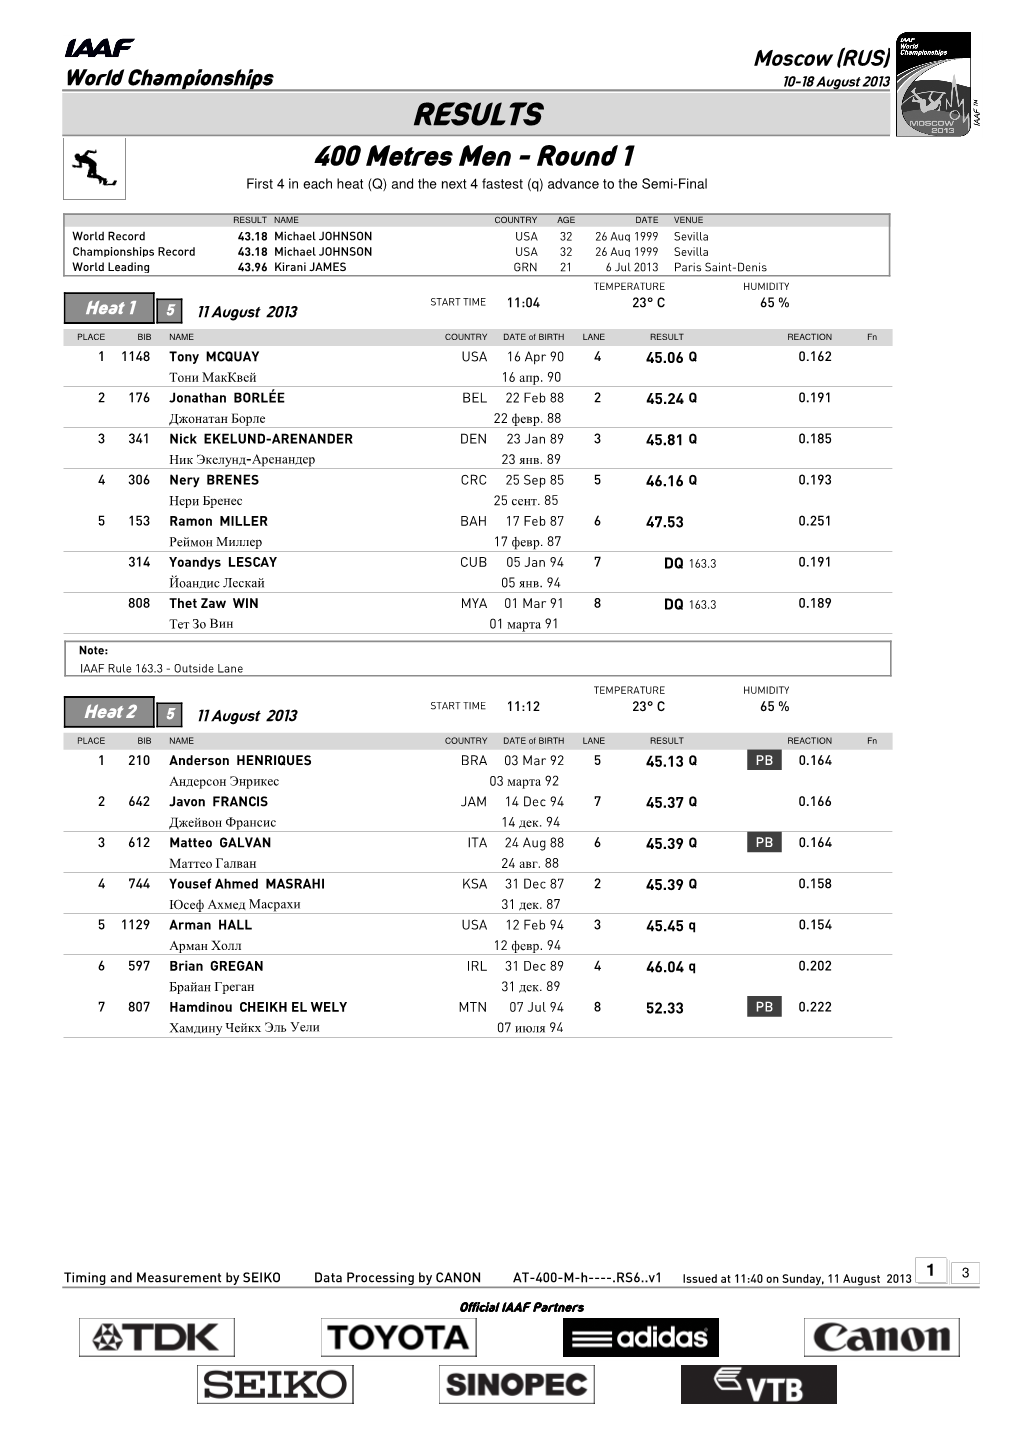 RESULTS 400 Metres Men - Round 1 First 4 in Each Heat (Q) and the Next 4 Fastest (Q) Advance to the Semi-Final